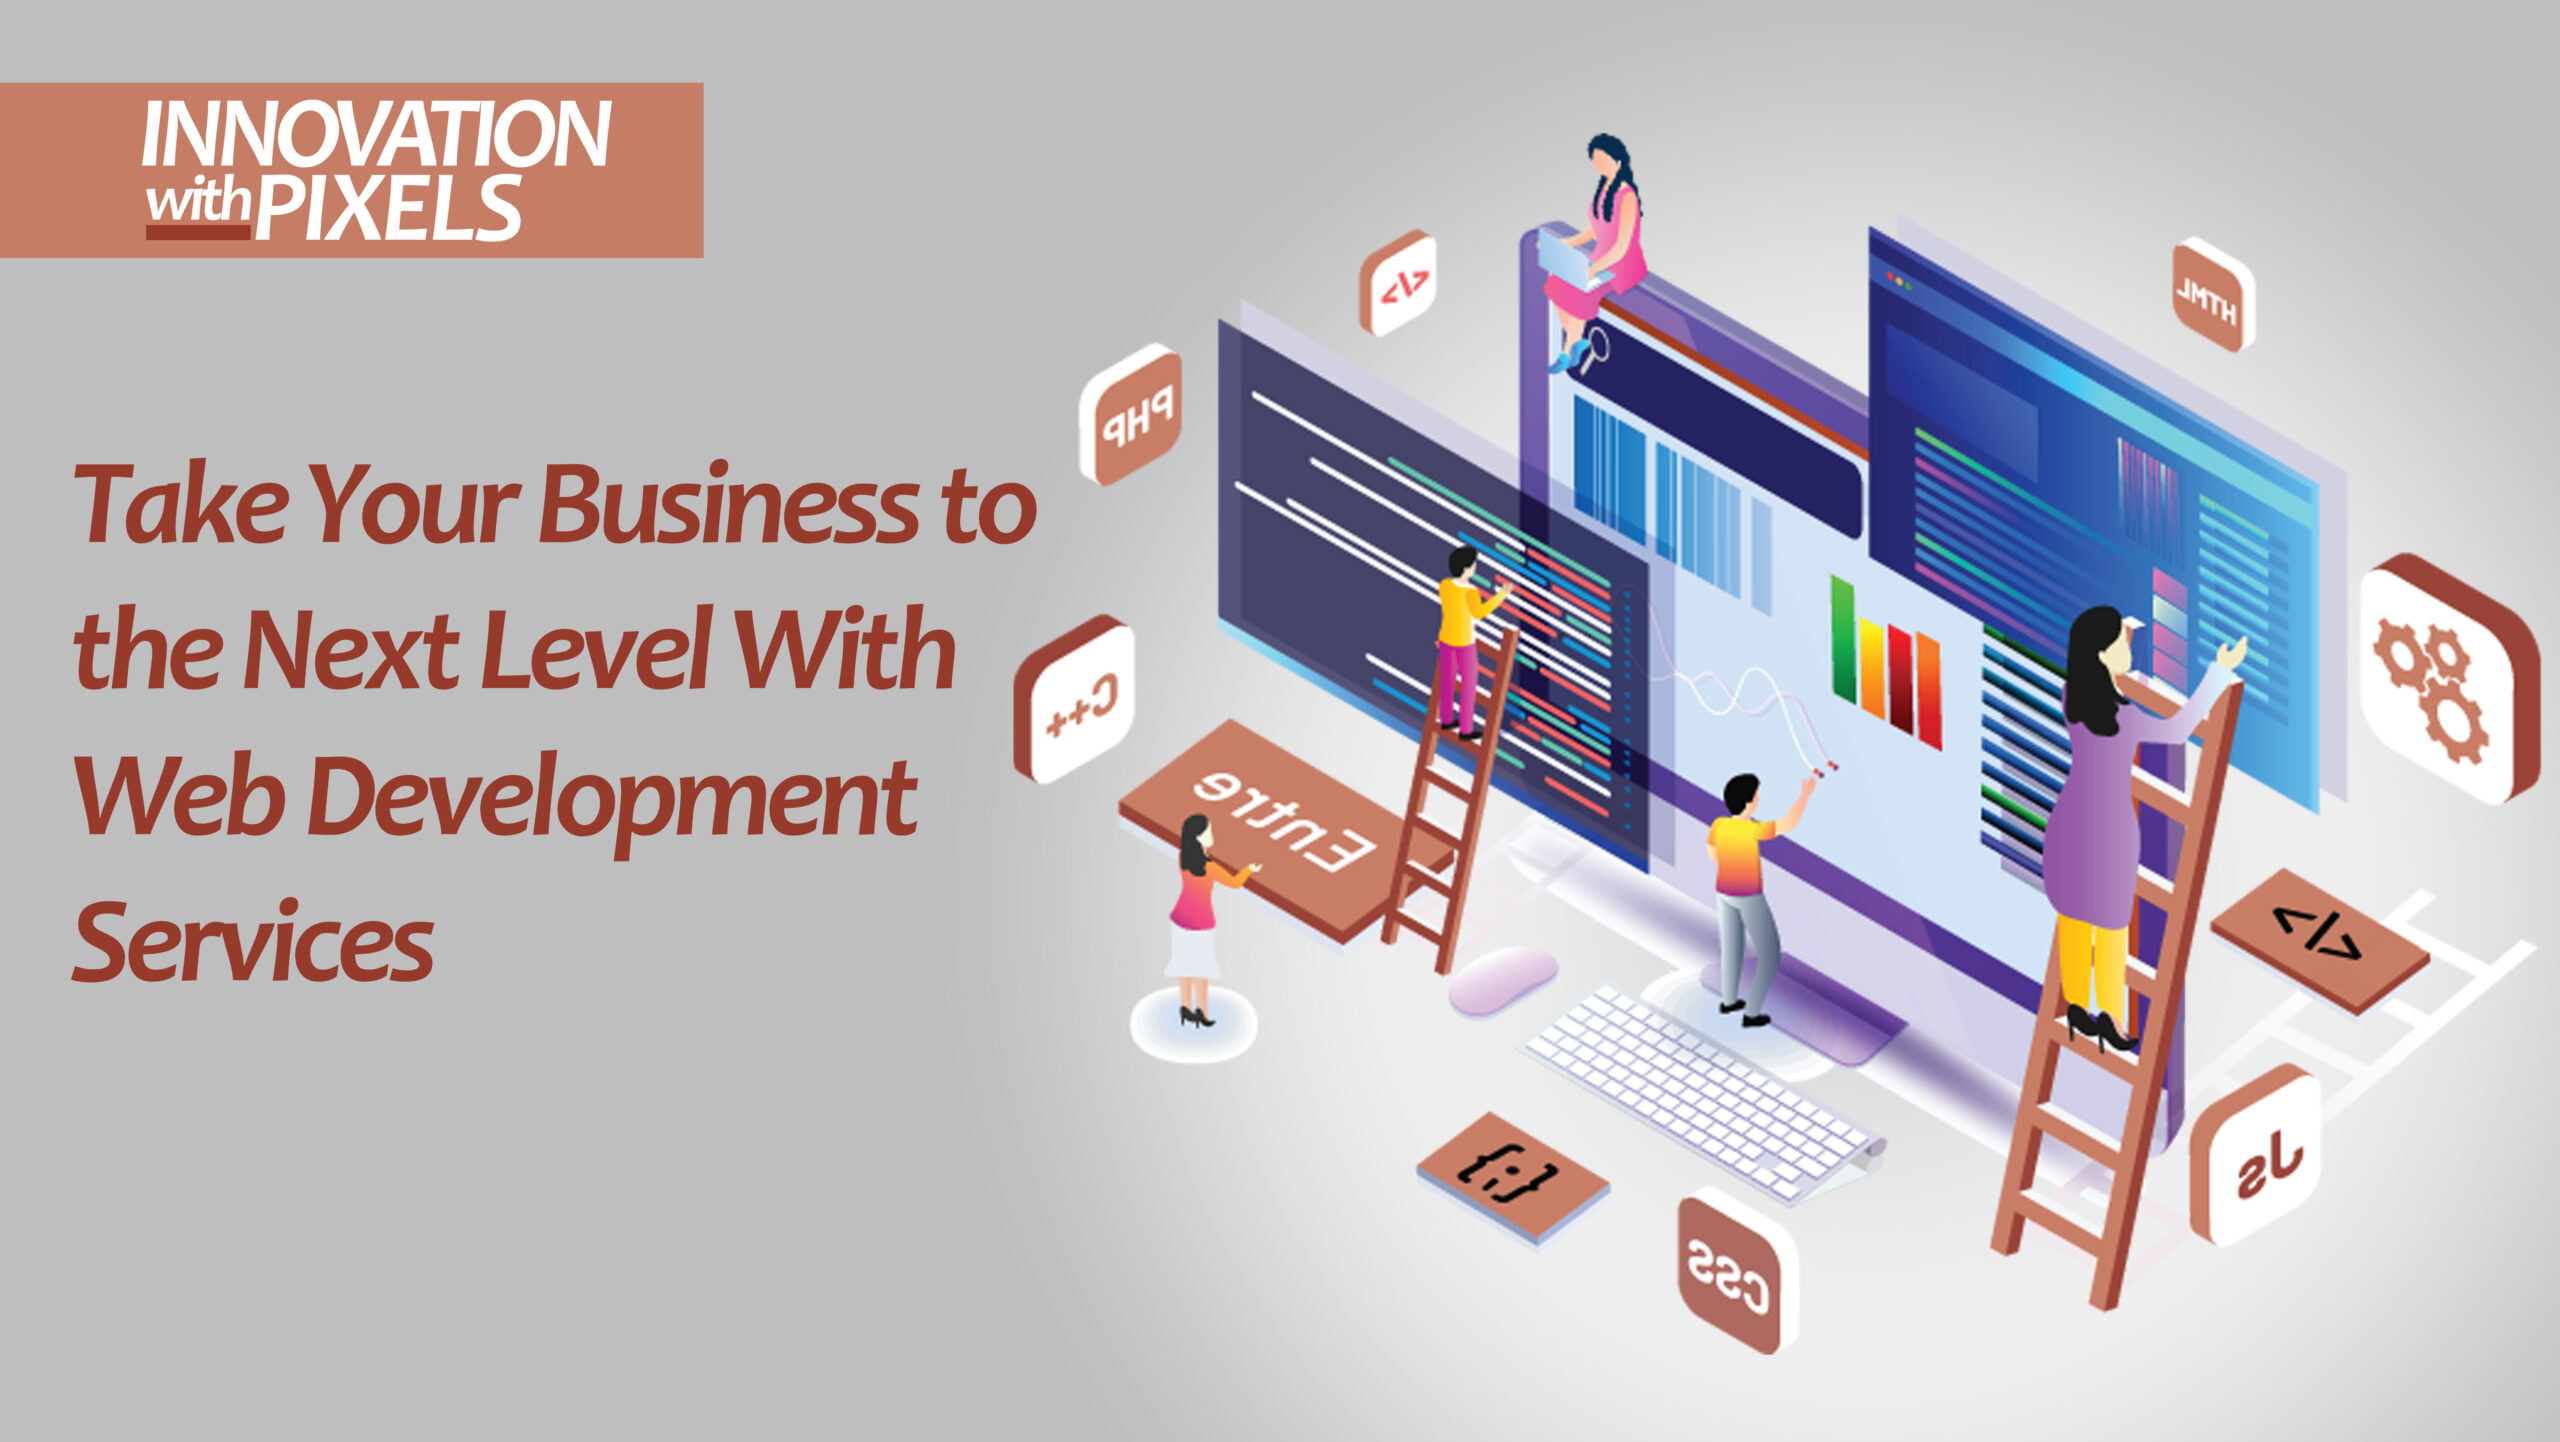 Take Your Business to the Next Level With Web Development Services